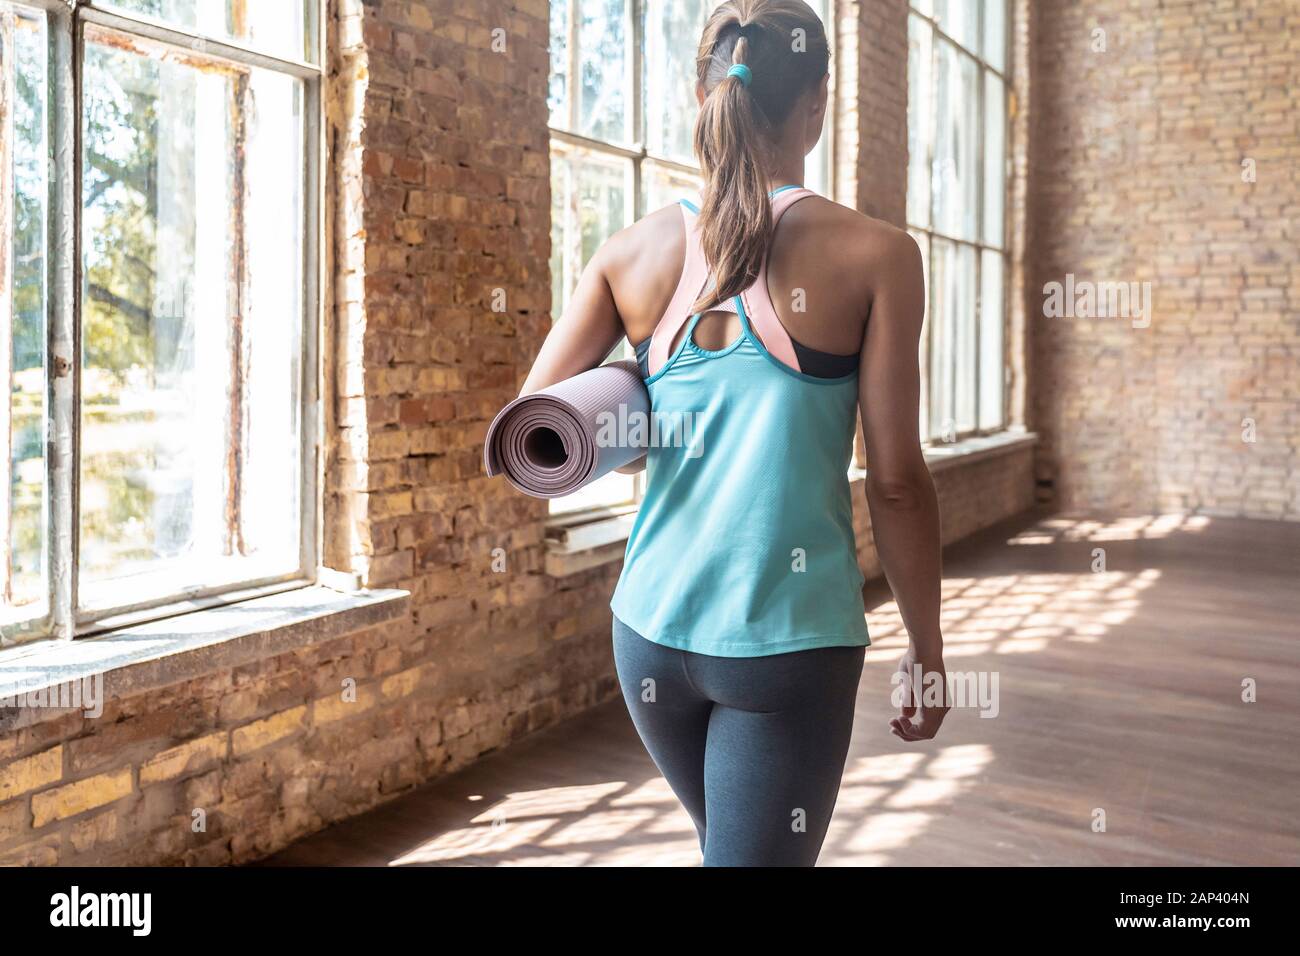 Back view of sporty fit young woman holding rolled yoga mat walking in gym Stock Photo